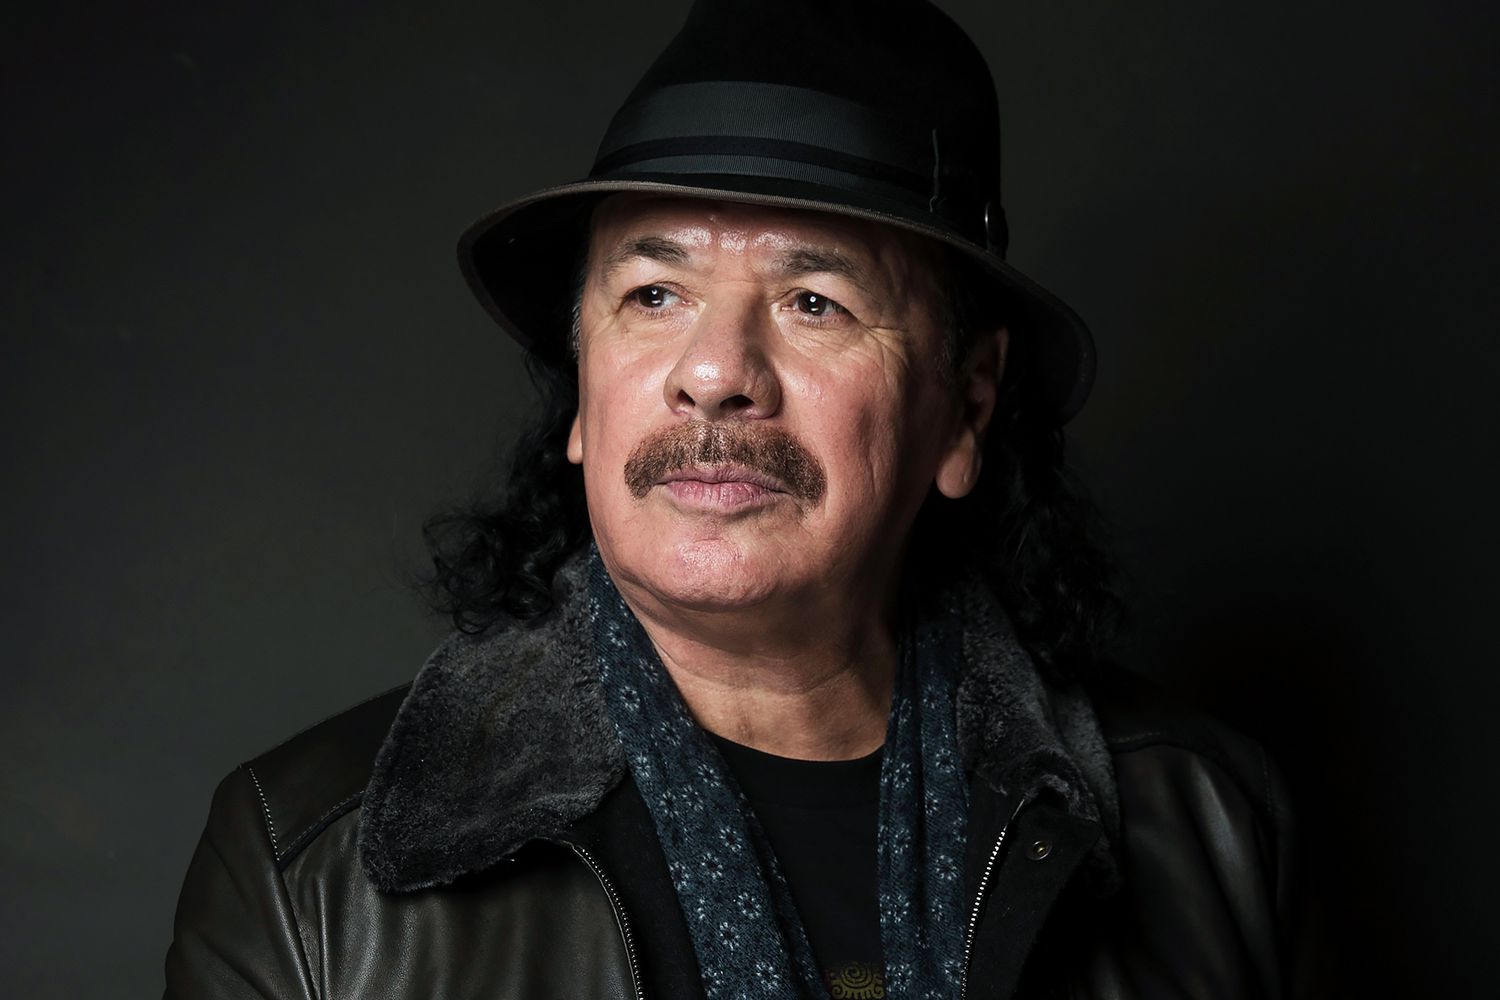 Mandatory Credit: Photo by Taylor Jewell/Invision/AP/Shutterstock (9243353b) Executive producer Carlos Santana poses for a portrait to promote the film, "Dolores", at the Music Lodge during the Sundance Film Festival, in Park City, Utah APTOPIX 2017 Sundance Film Festival - "Dolores" Portraits, Park City, USA - 20 Jan 2017